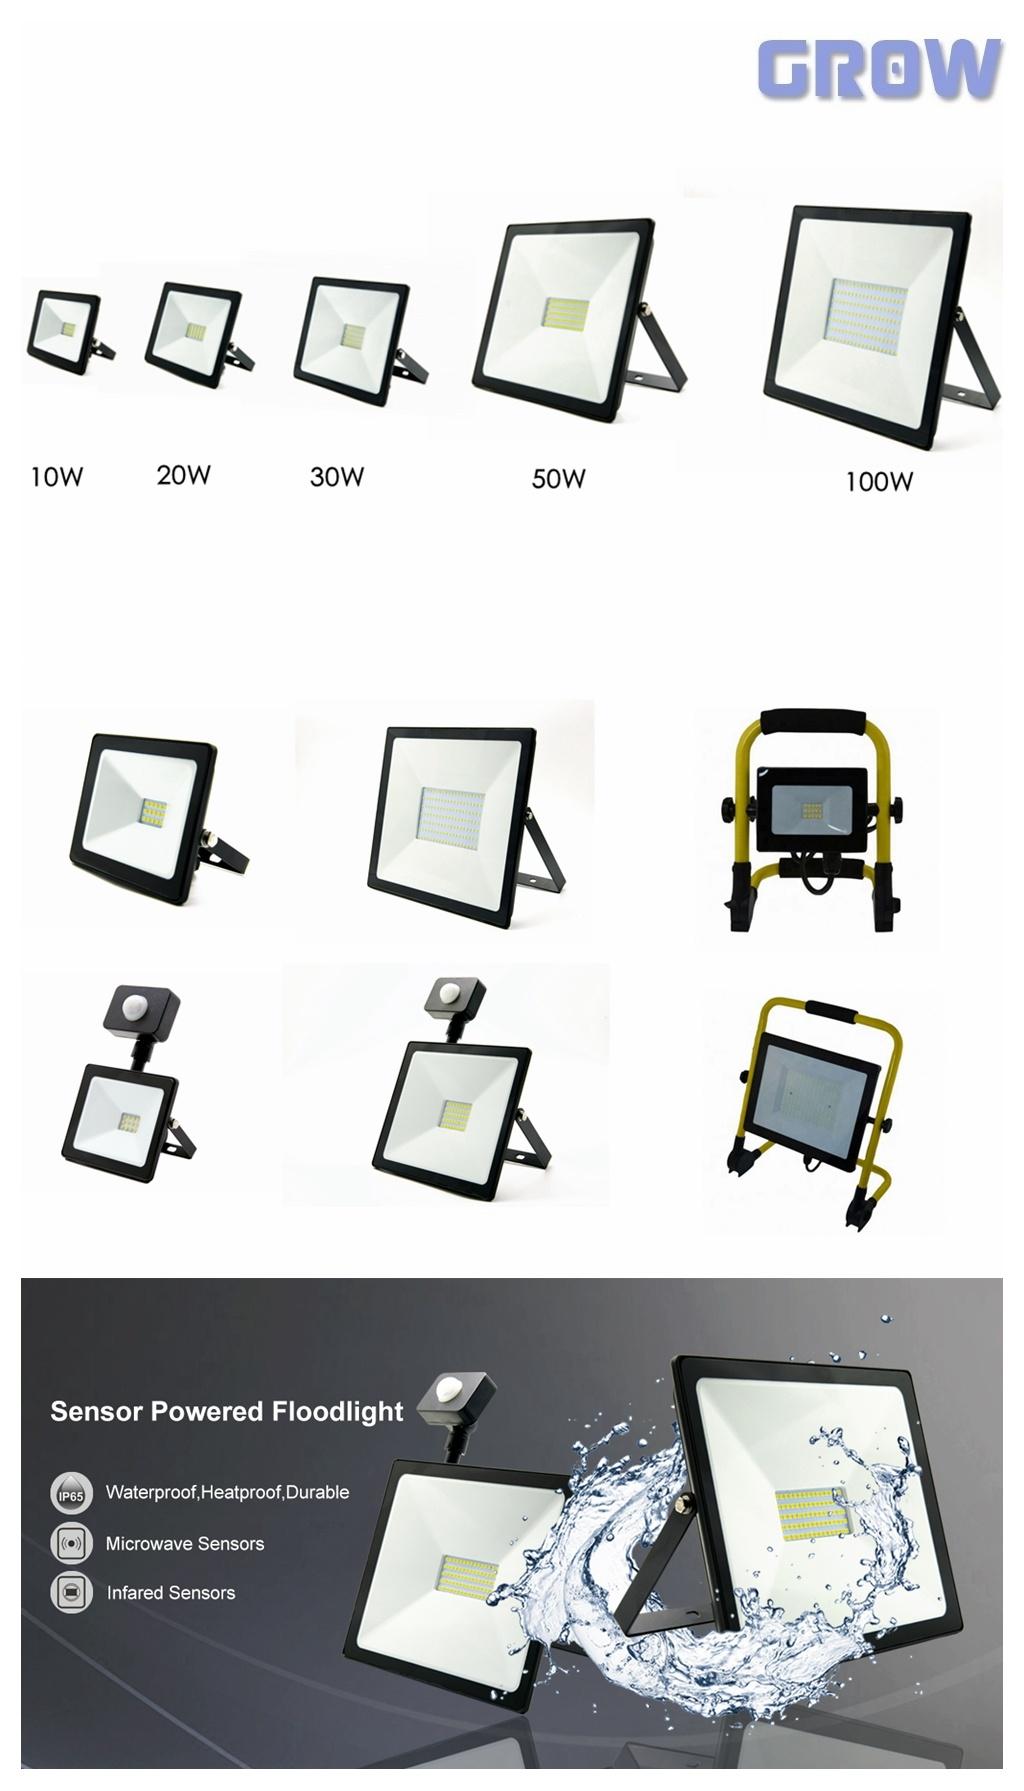 Distributor of High Power LED Floodlight 100W for Work Industrial Outdoor Flood Lighting